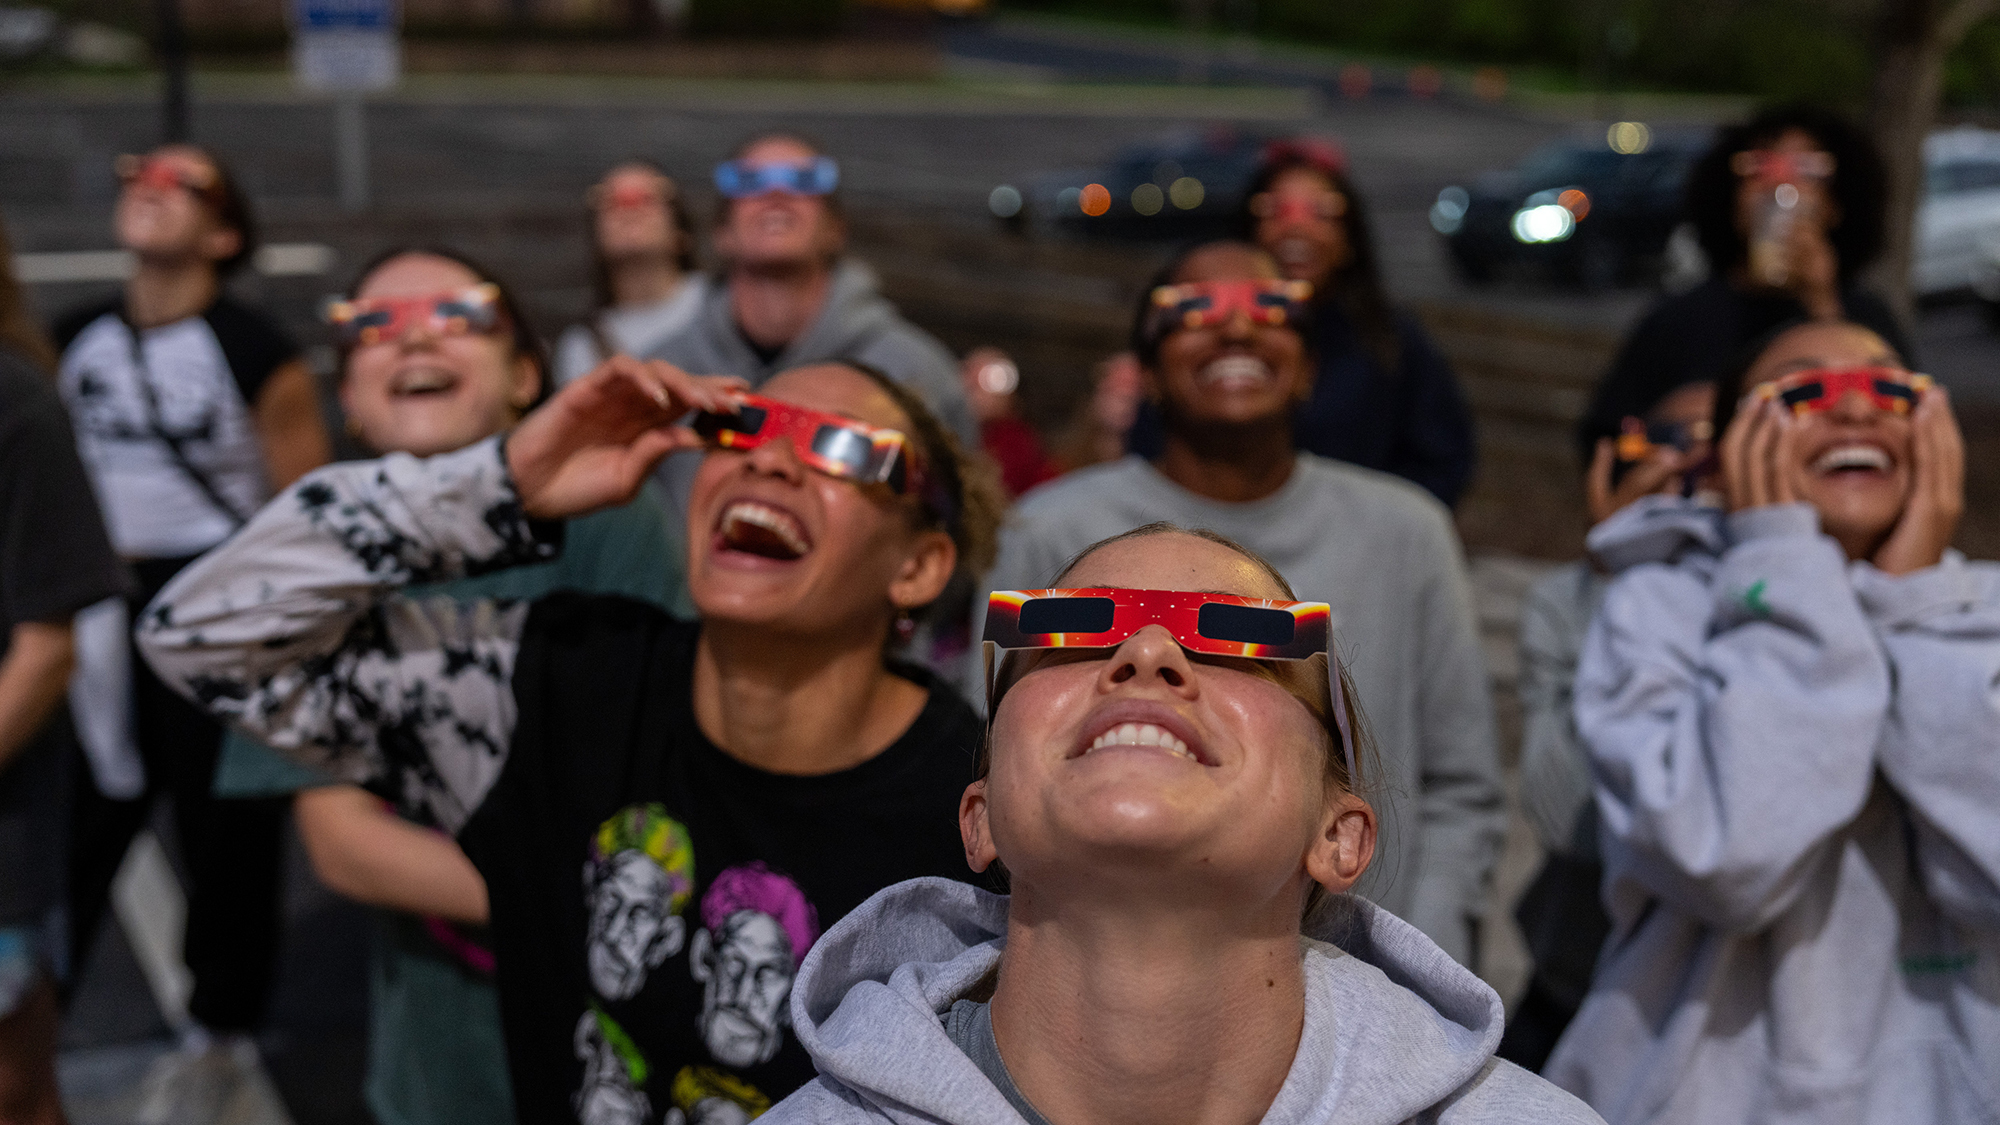 People looking up at eclipse wearing protective glasses